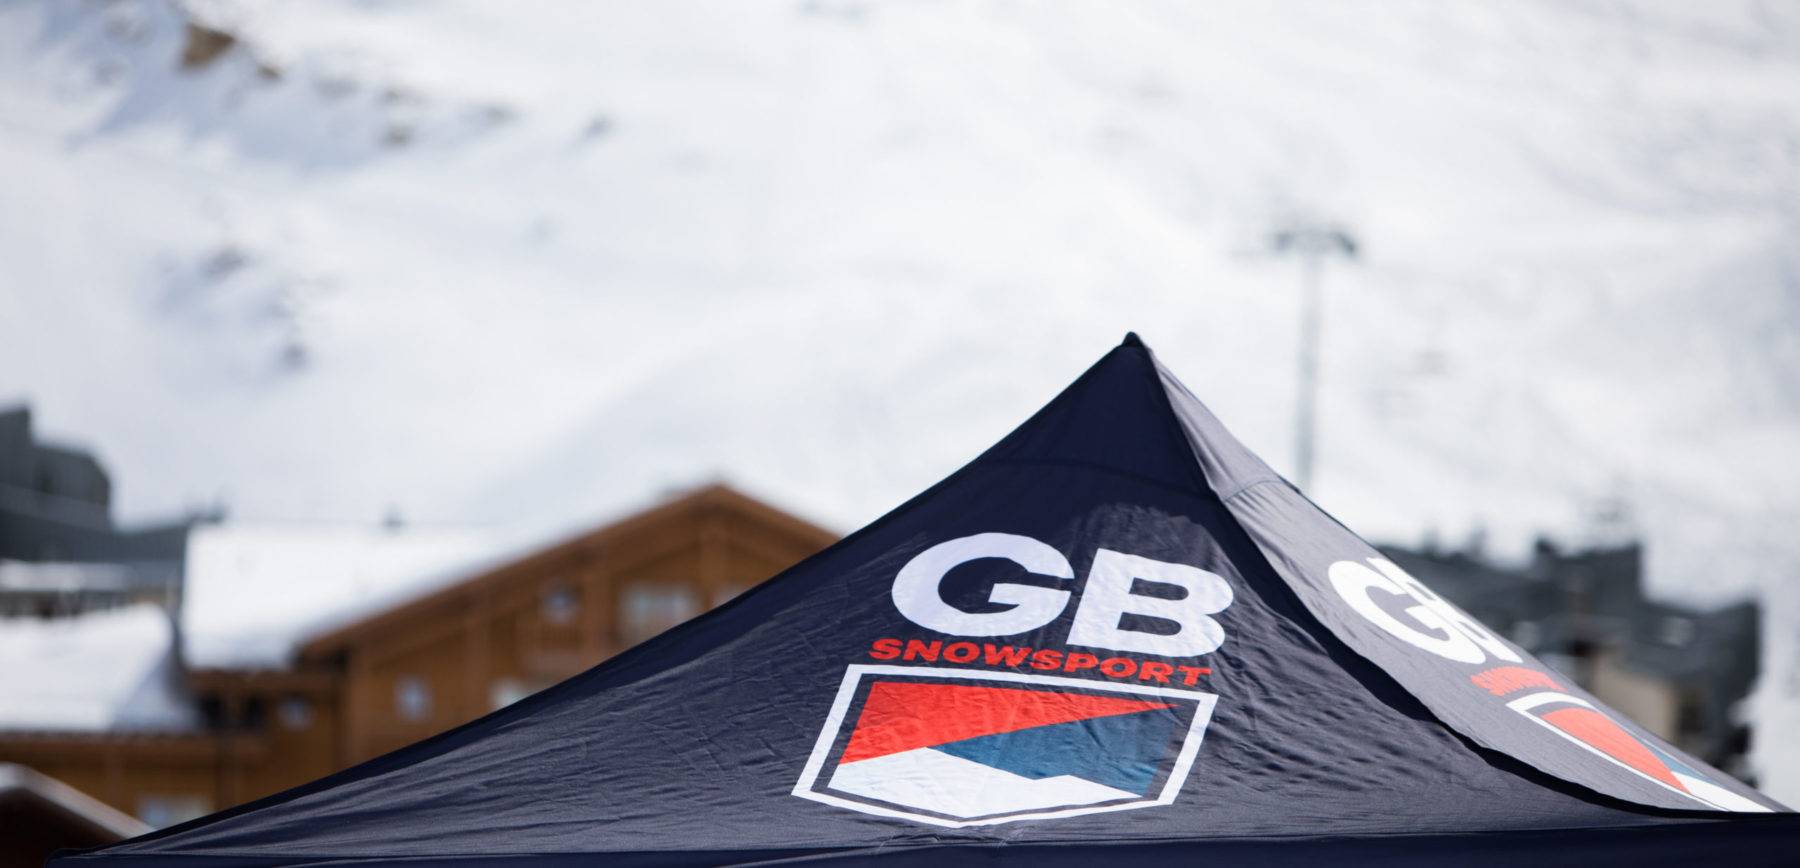 New head injuries protocols introduced to protect welfare of British skiers and snowboarders